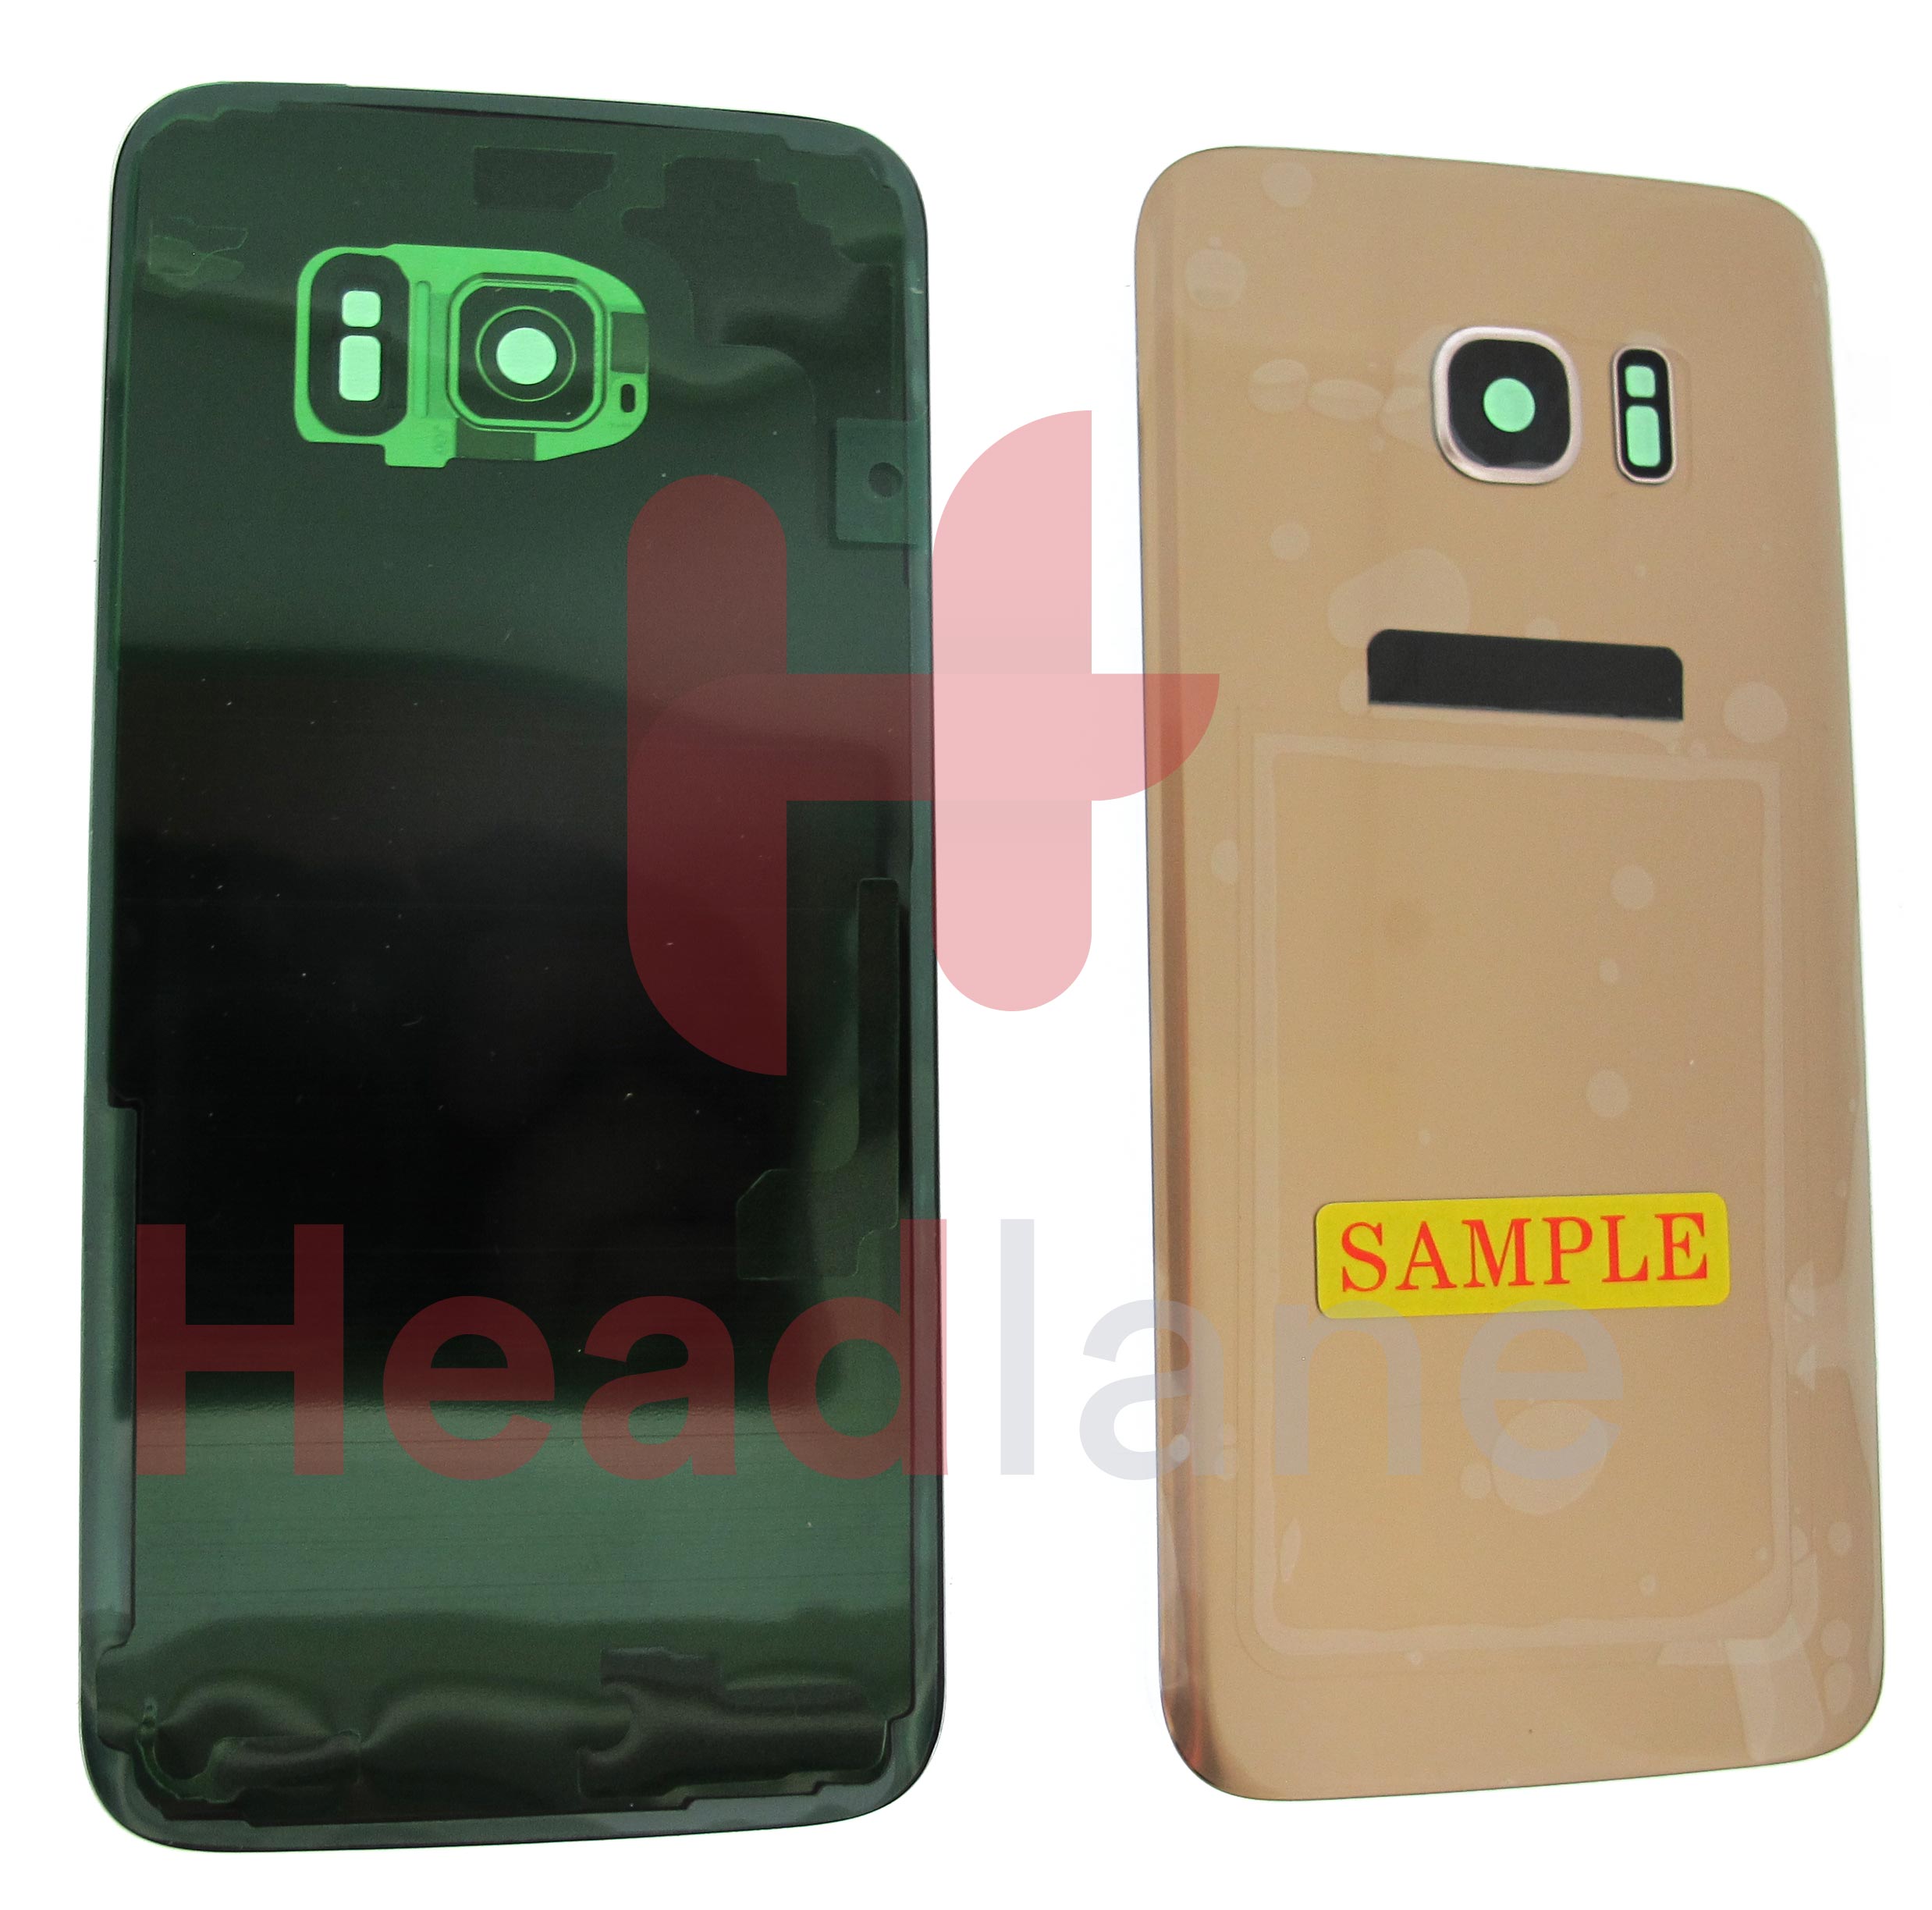 Samsung SM-G935 Galaxy S7 Edge Back / Battery Cover - Gold (USA Version)